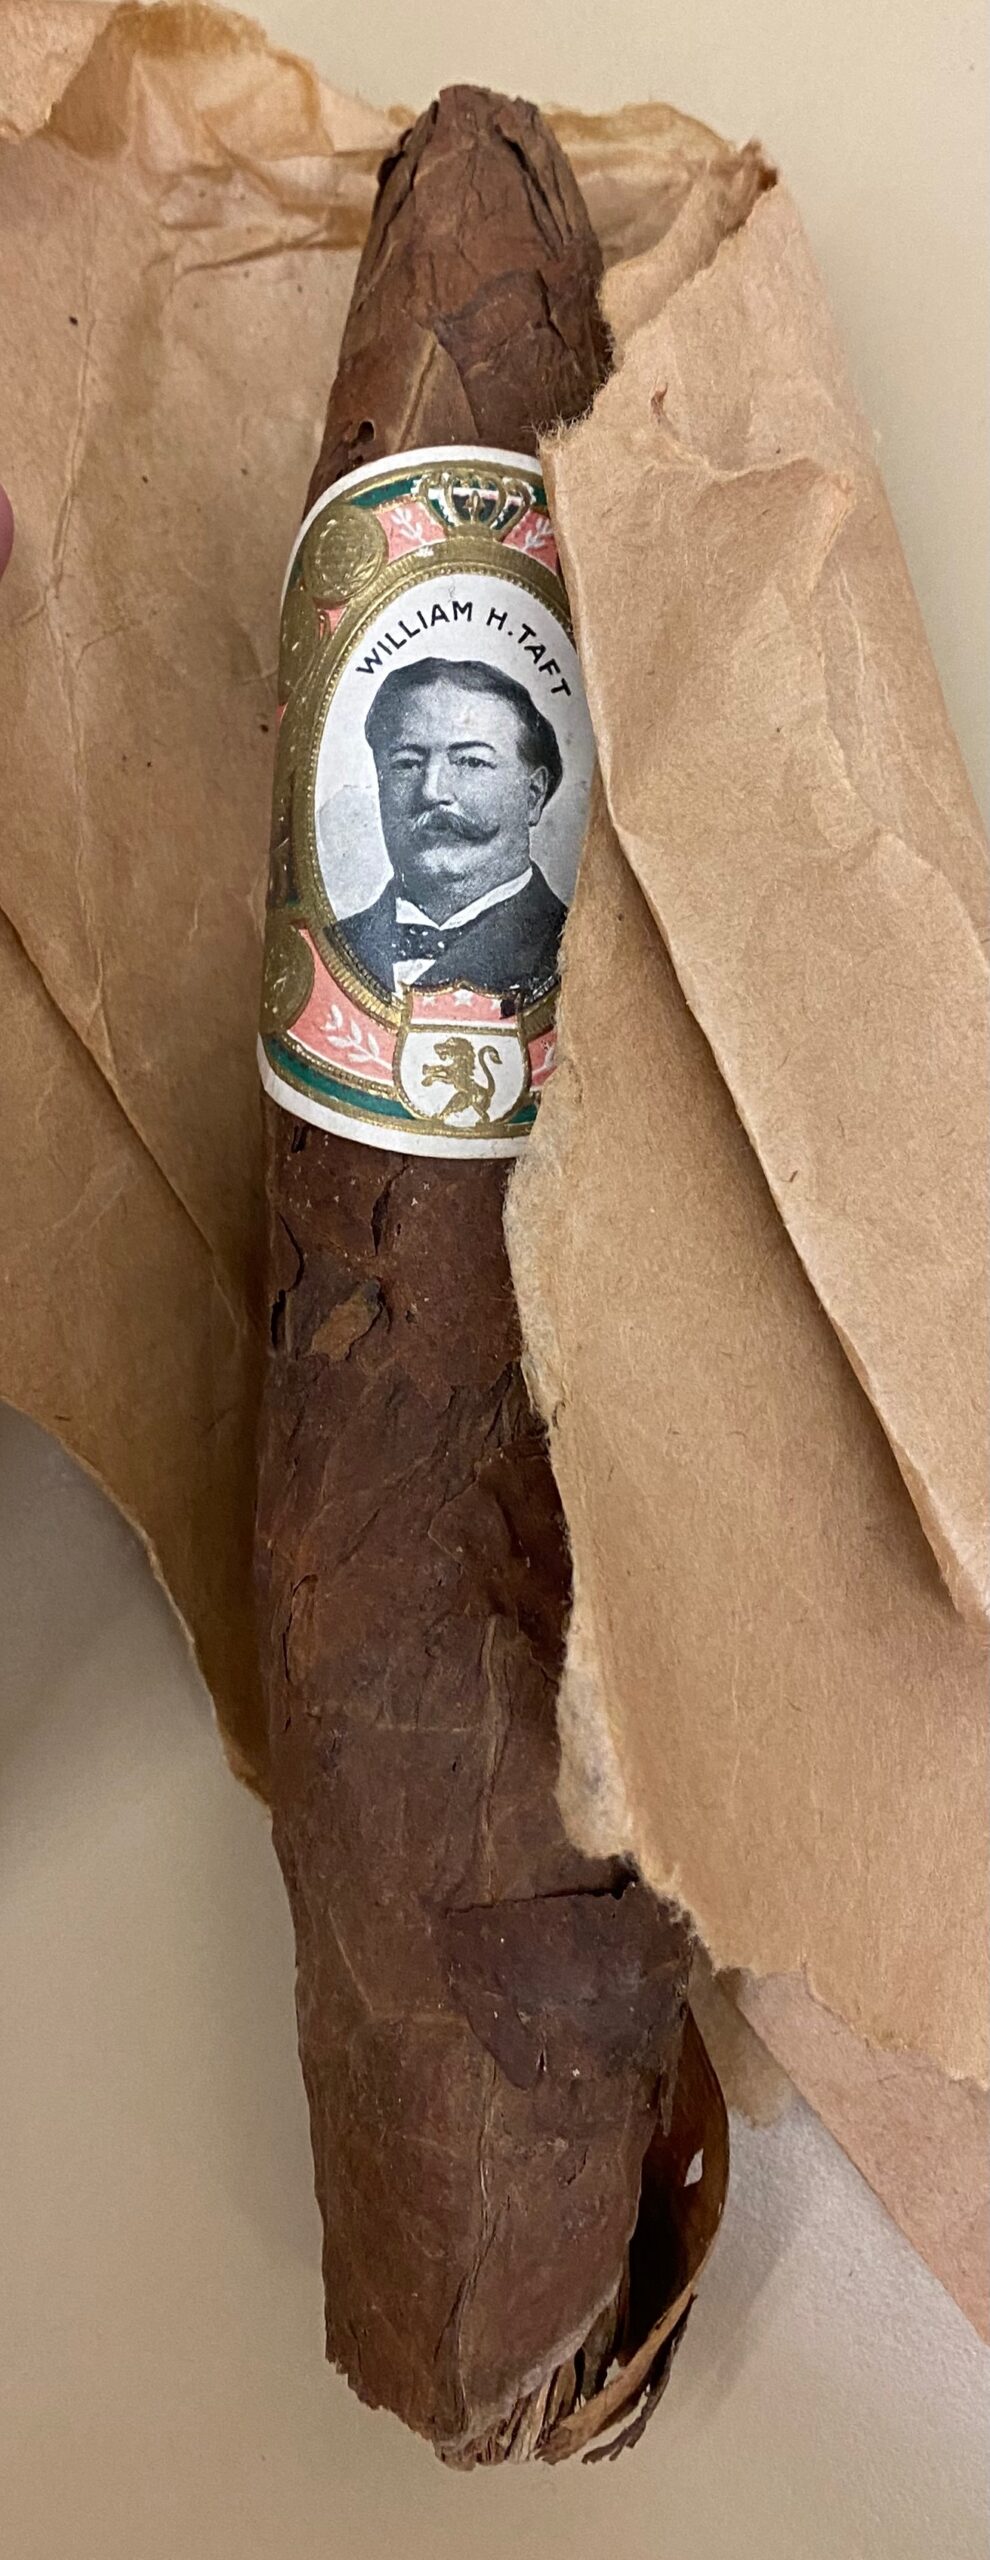 Cigar with photo portrait of Taft wrapped around the center of the cigar.